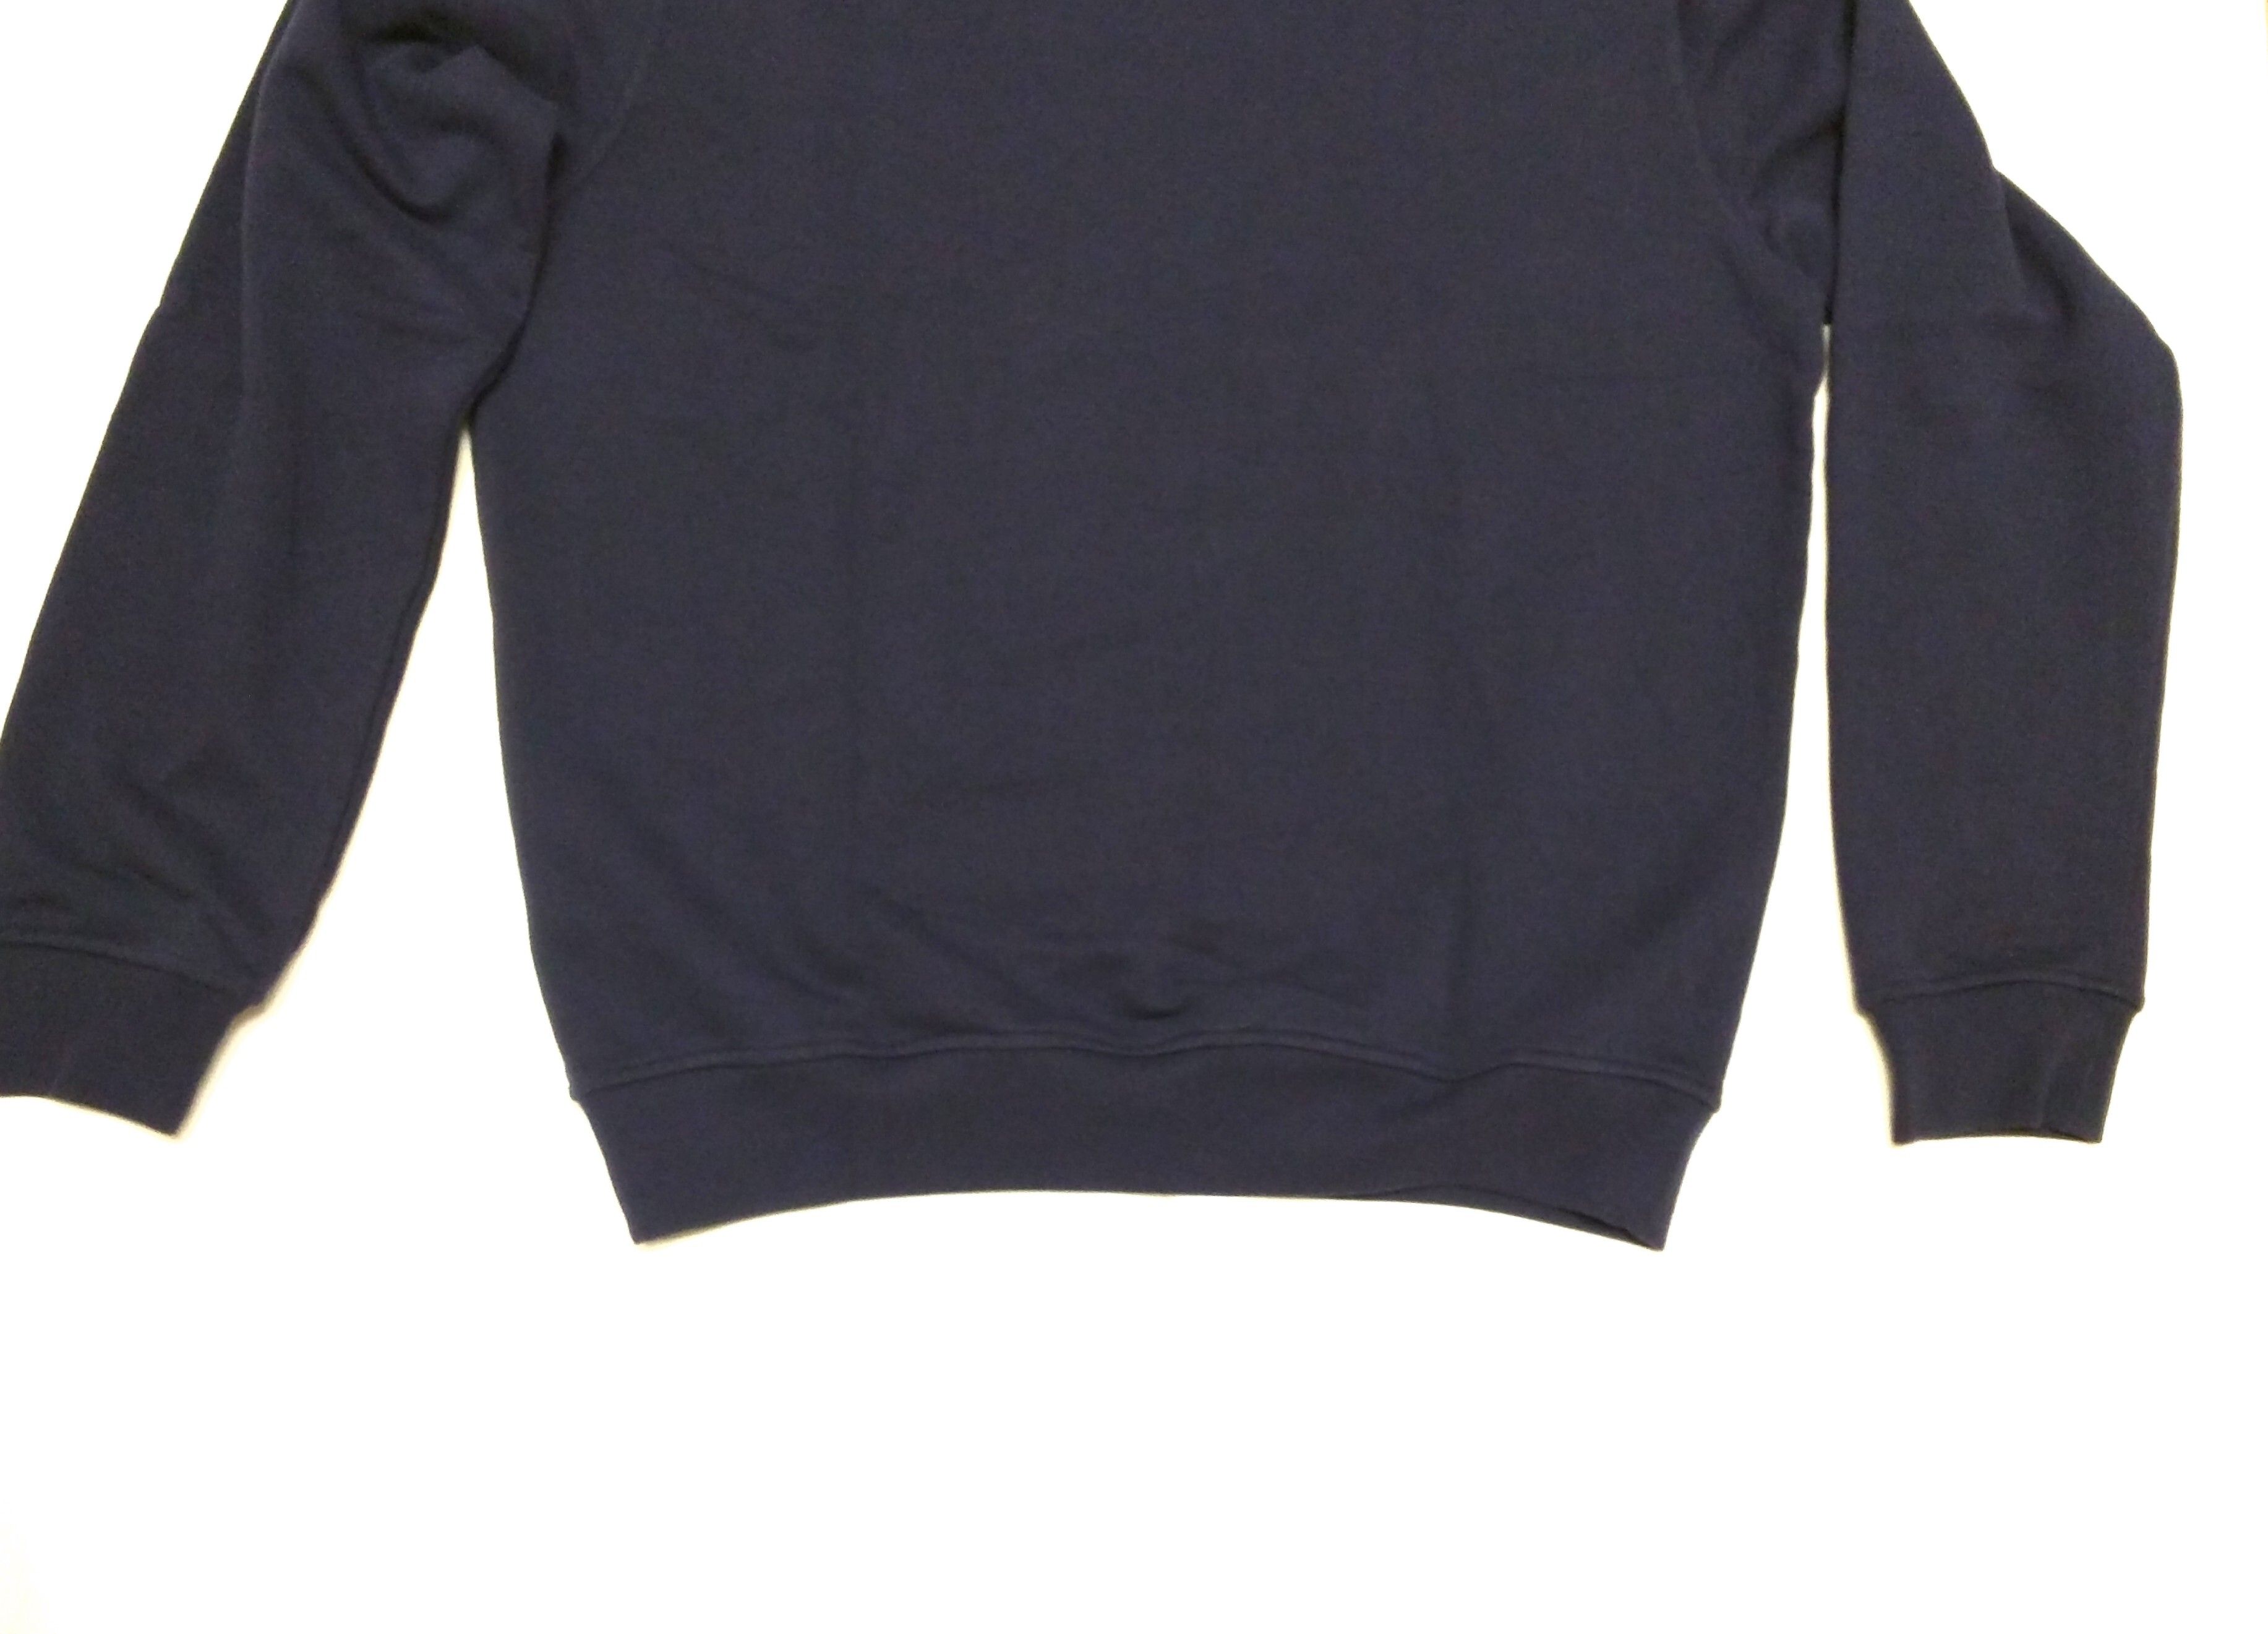 Maison Margiela Stereotype Hoodie Navy Blue 48 MMM Pullover Size US L / EU 52-54 / 3 - 7 Thumbnail